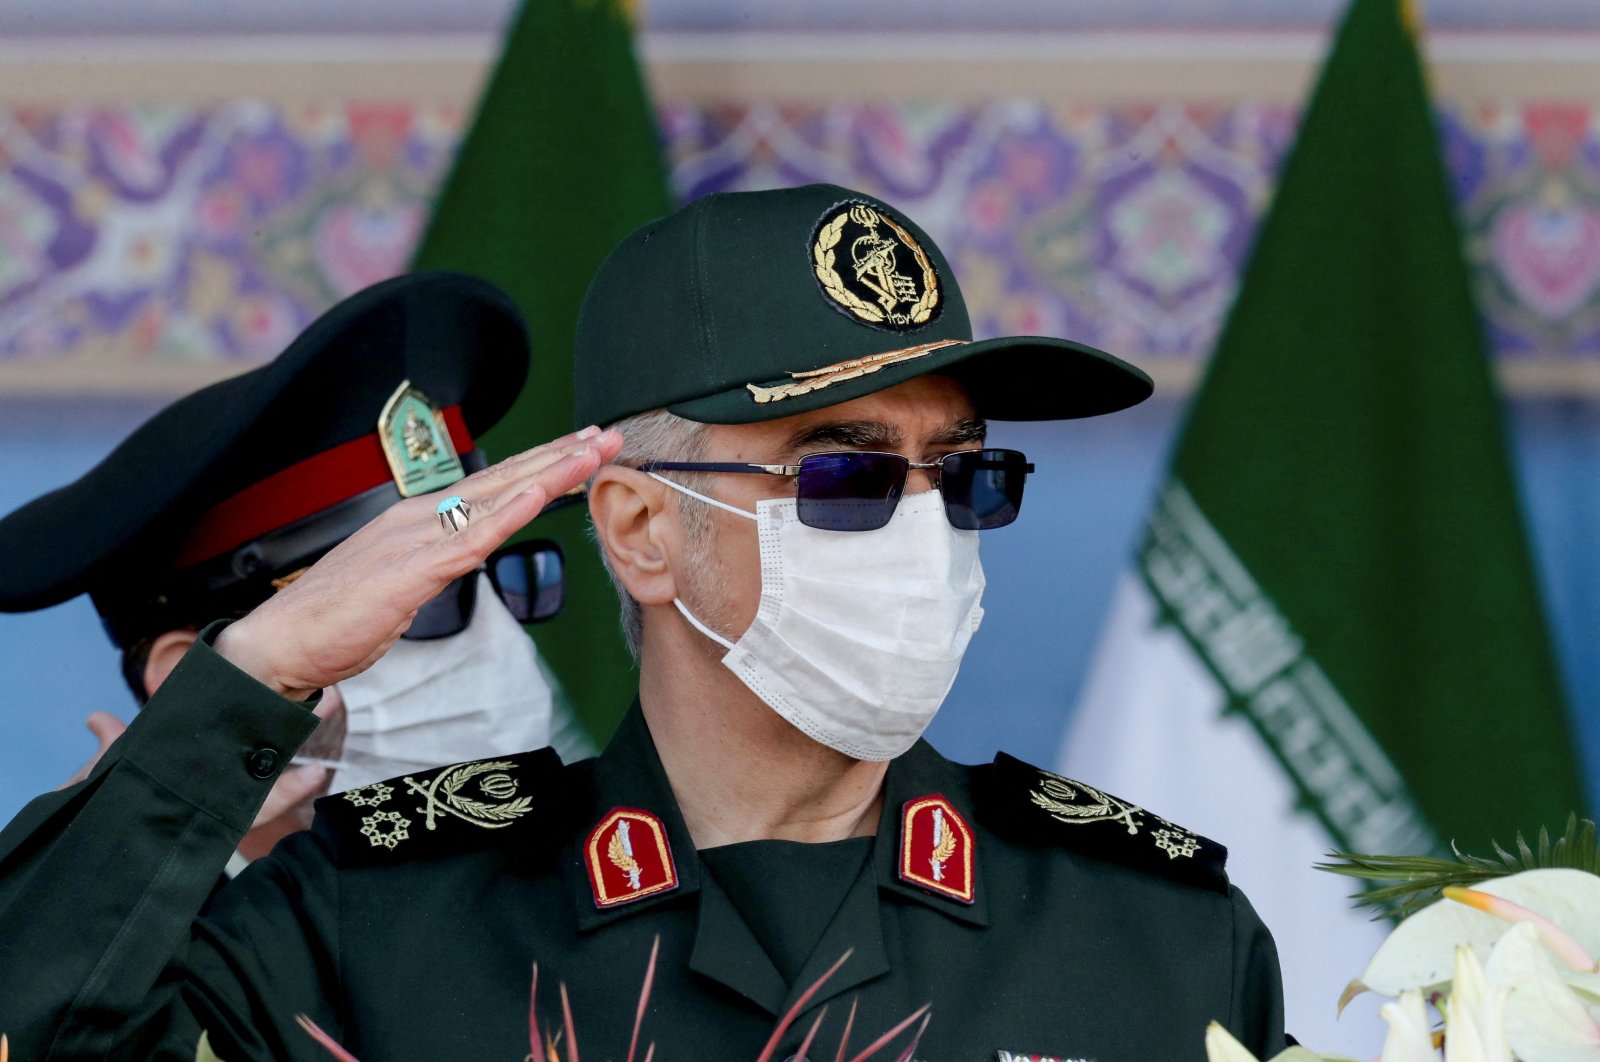 Iranian Armed Forces Chief of Staff Major Gen. Mohammad Bagheri salutes during a ceremony during the National Army Day parade in Tehran, Iran, April 18, 2022. (Reuters Photo)